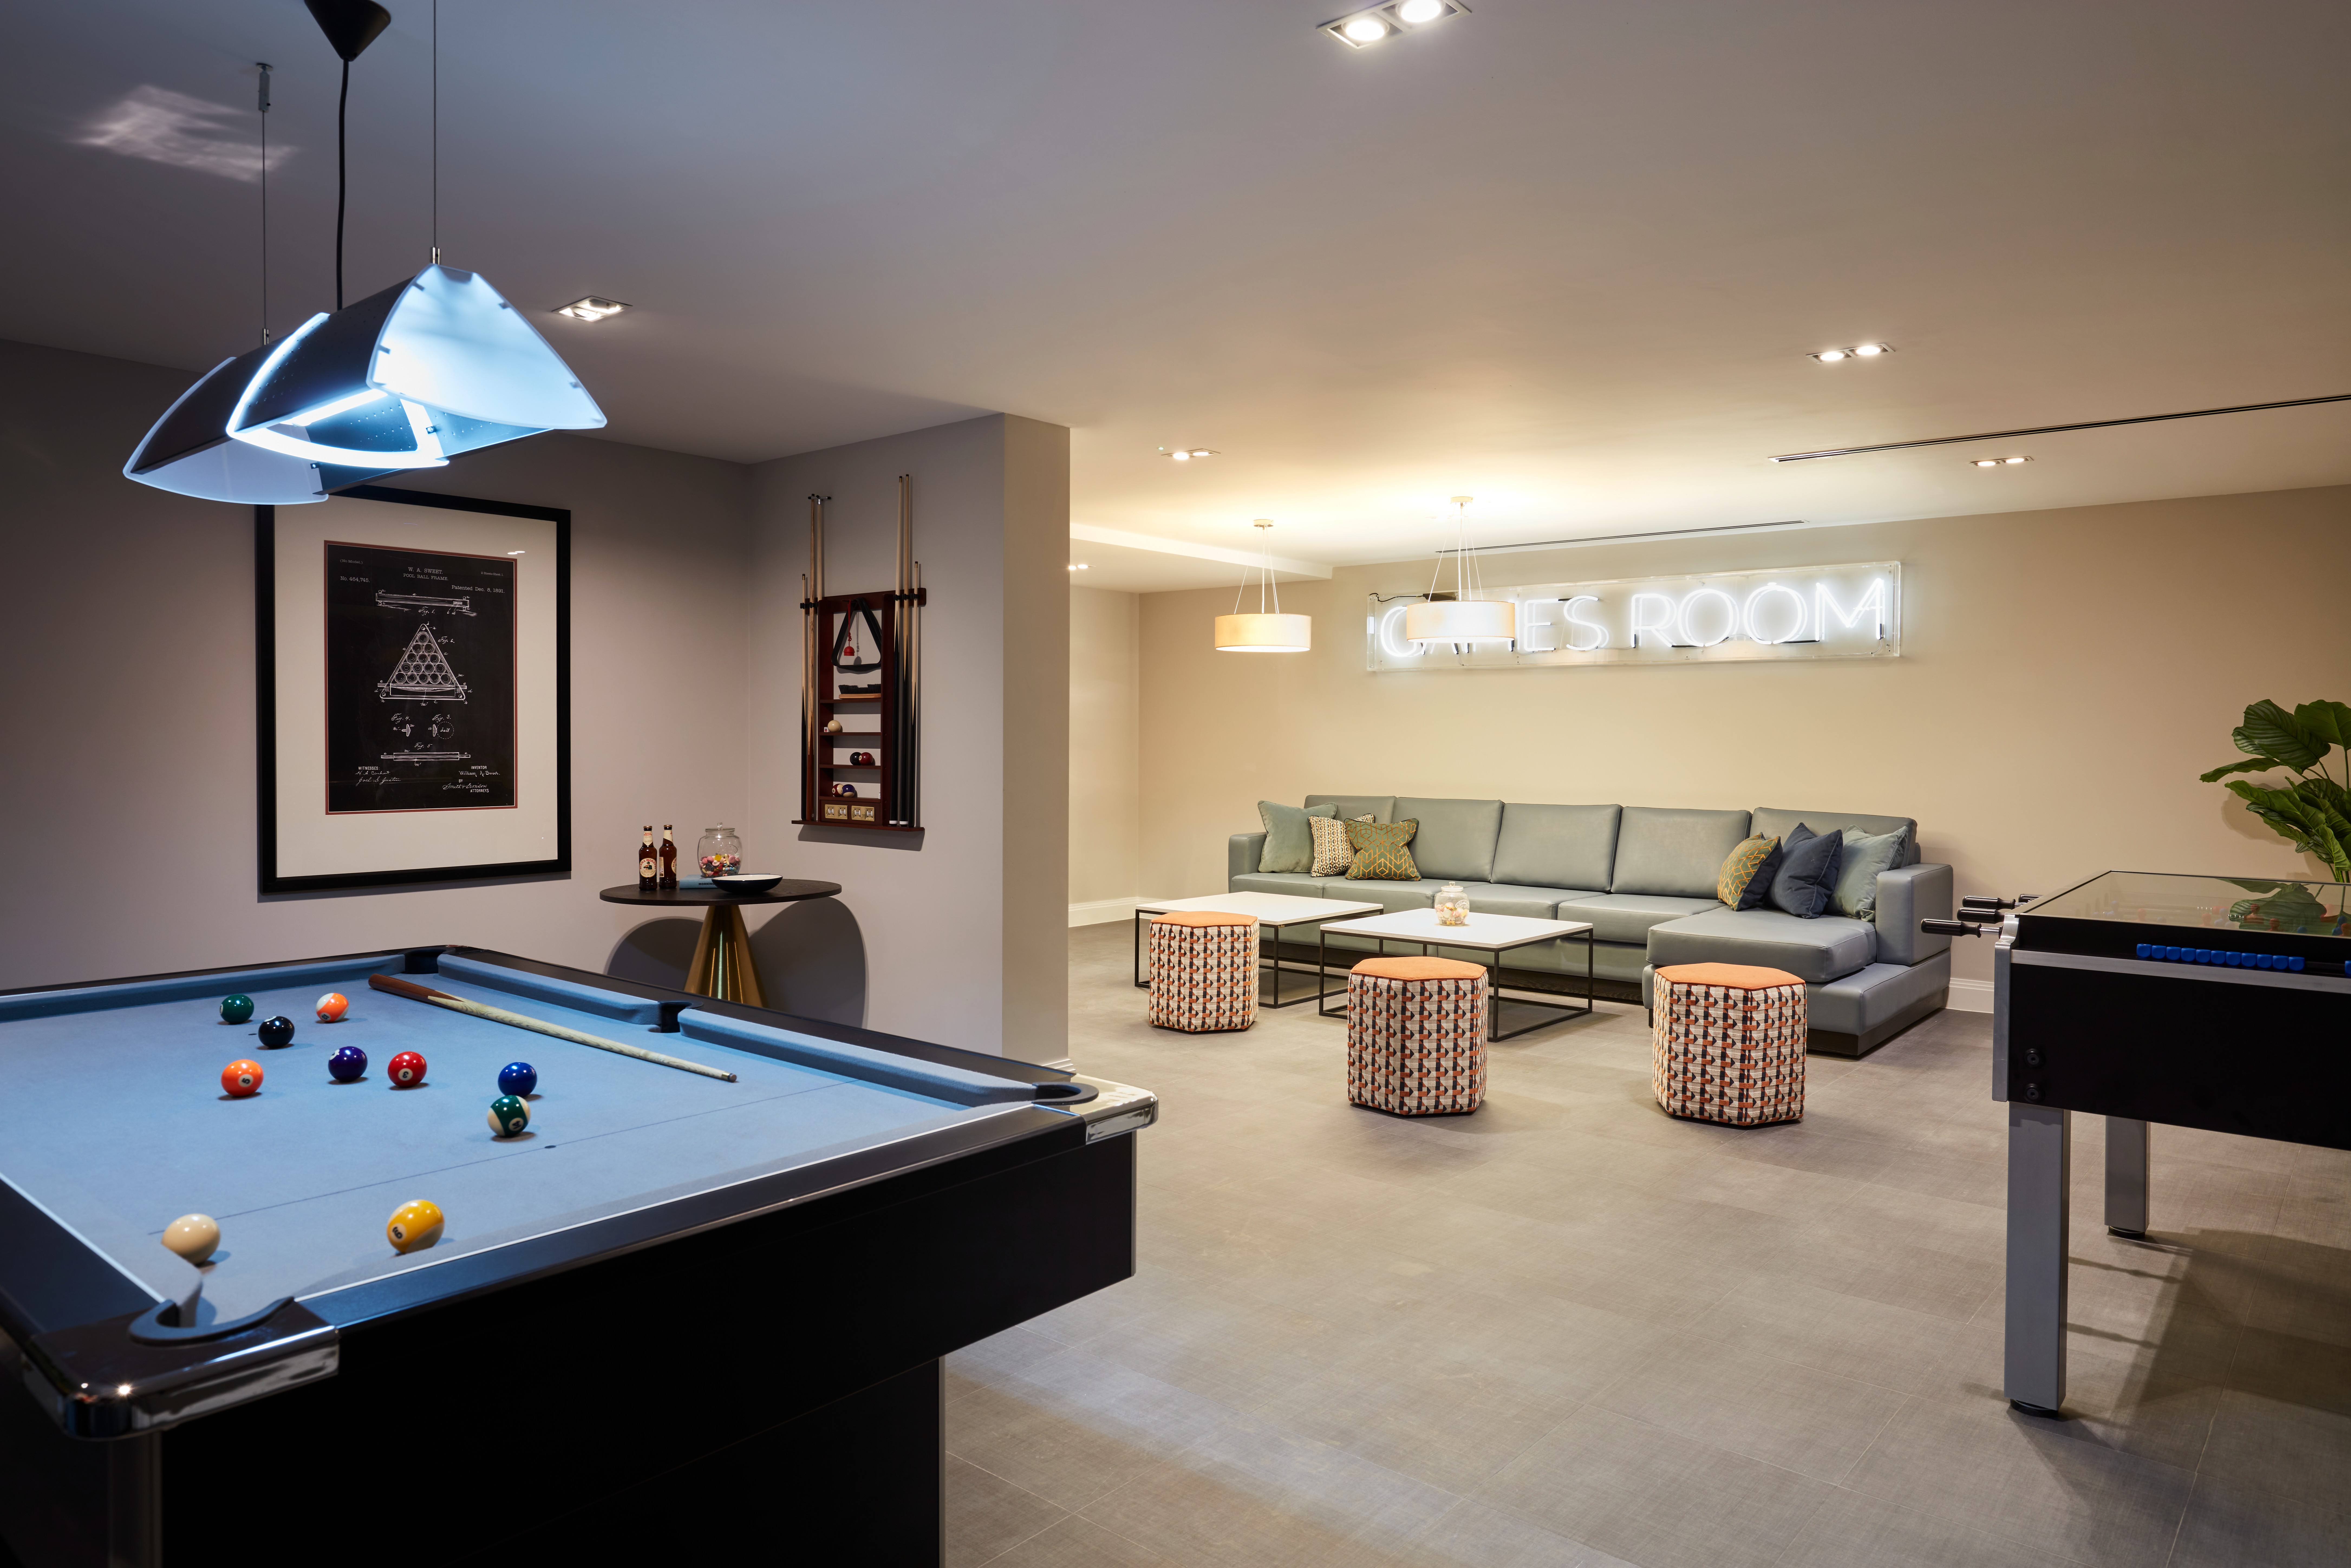 The Claves Games Room | New Homes in Mill Hill, North London